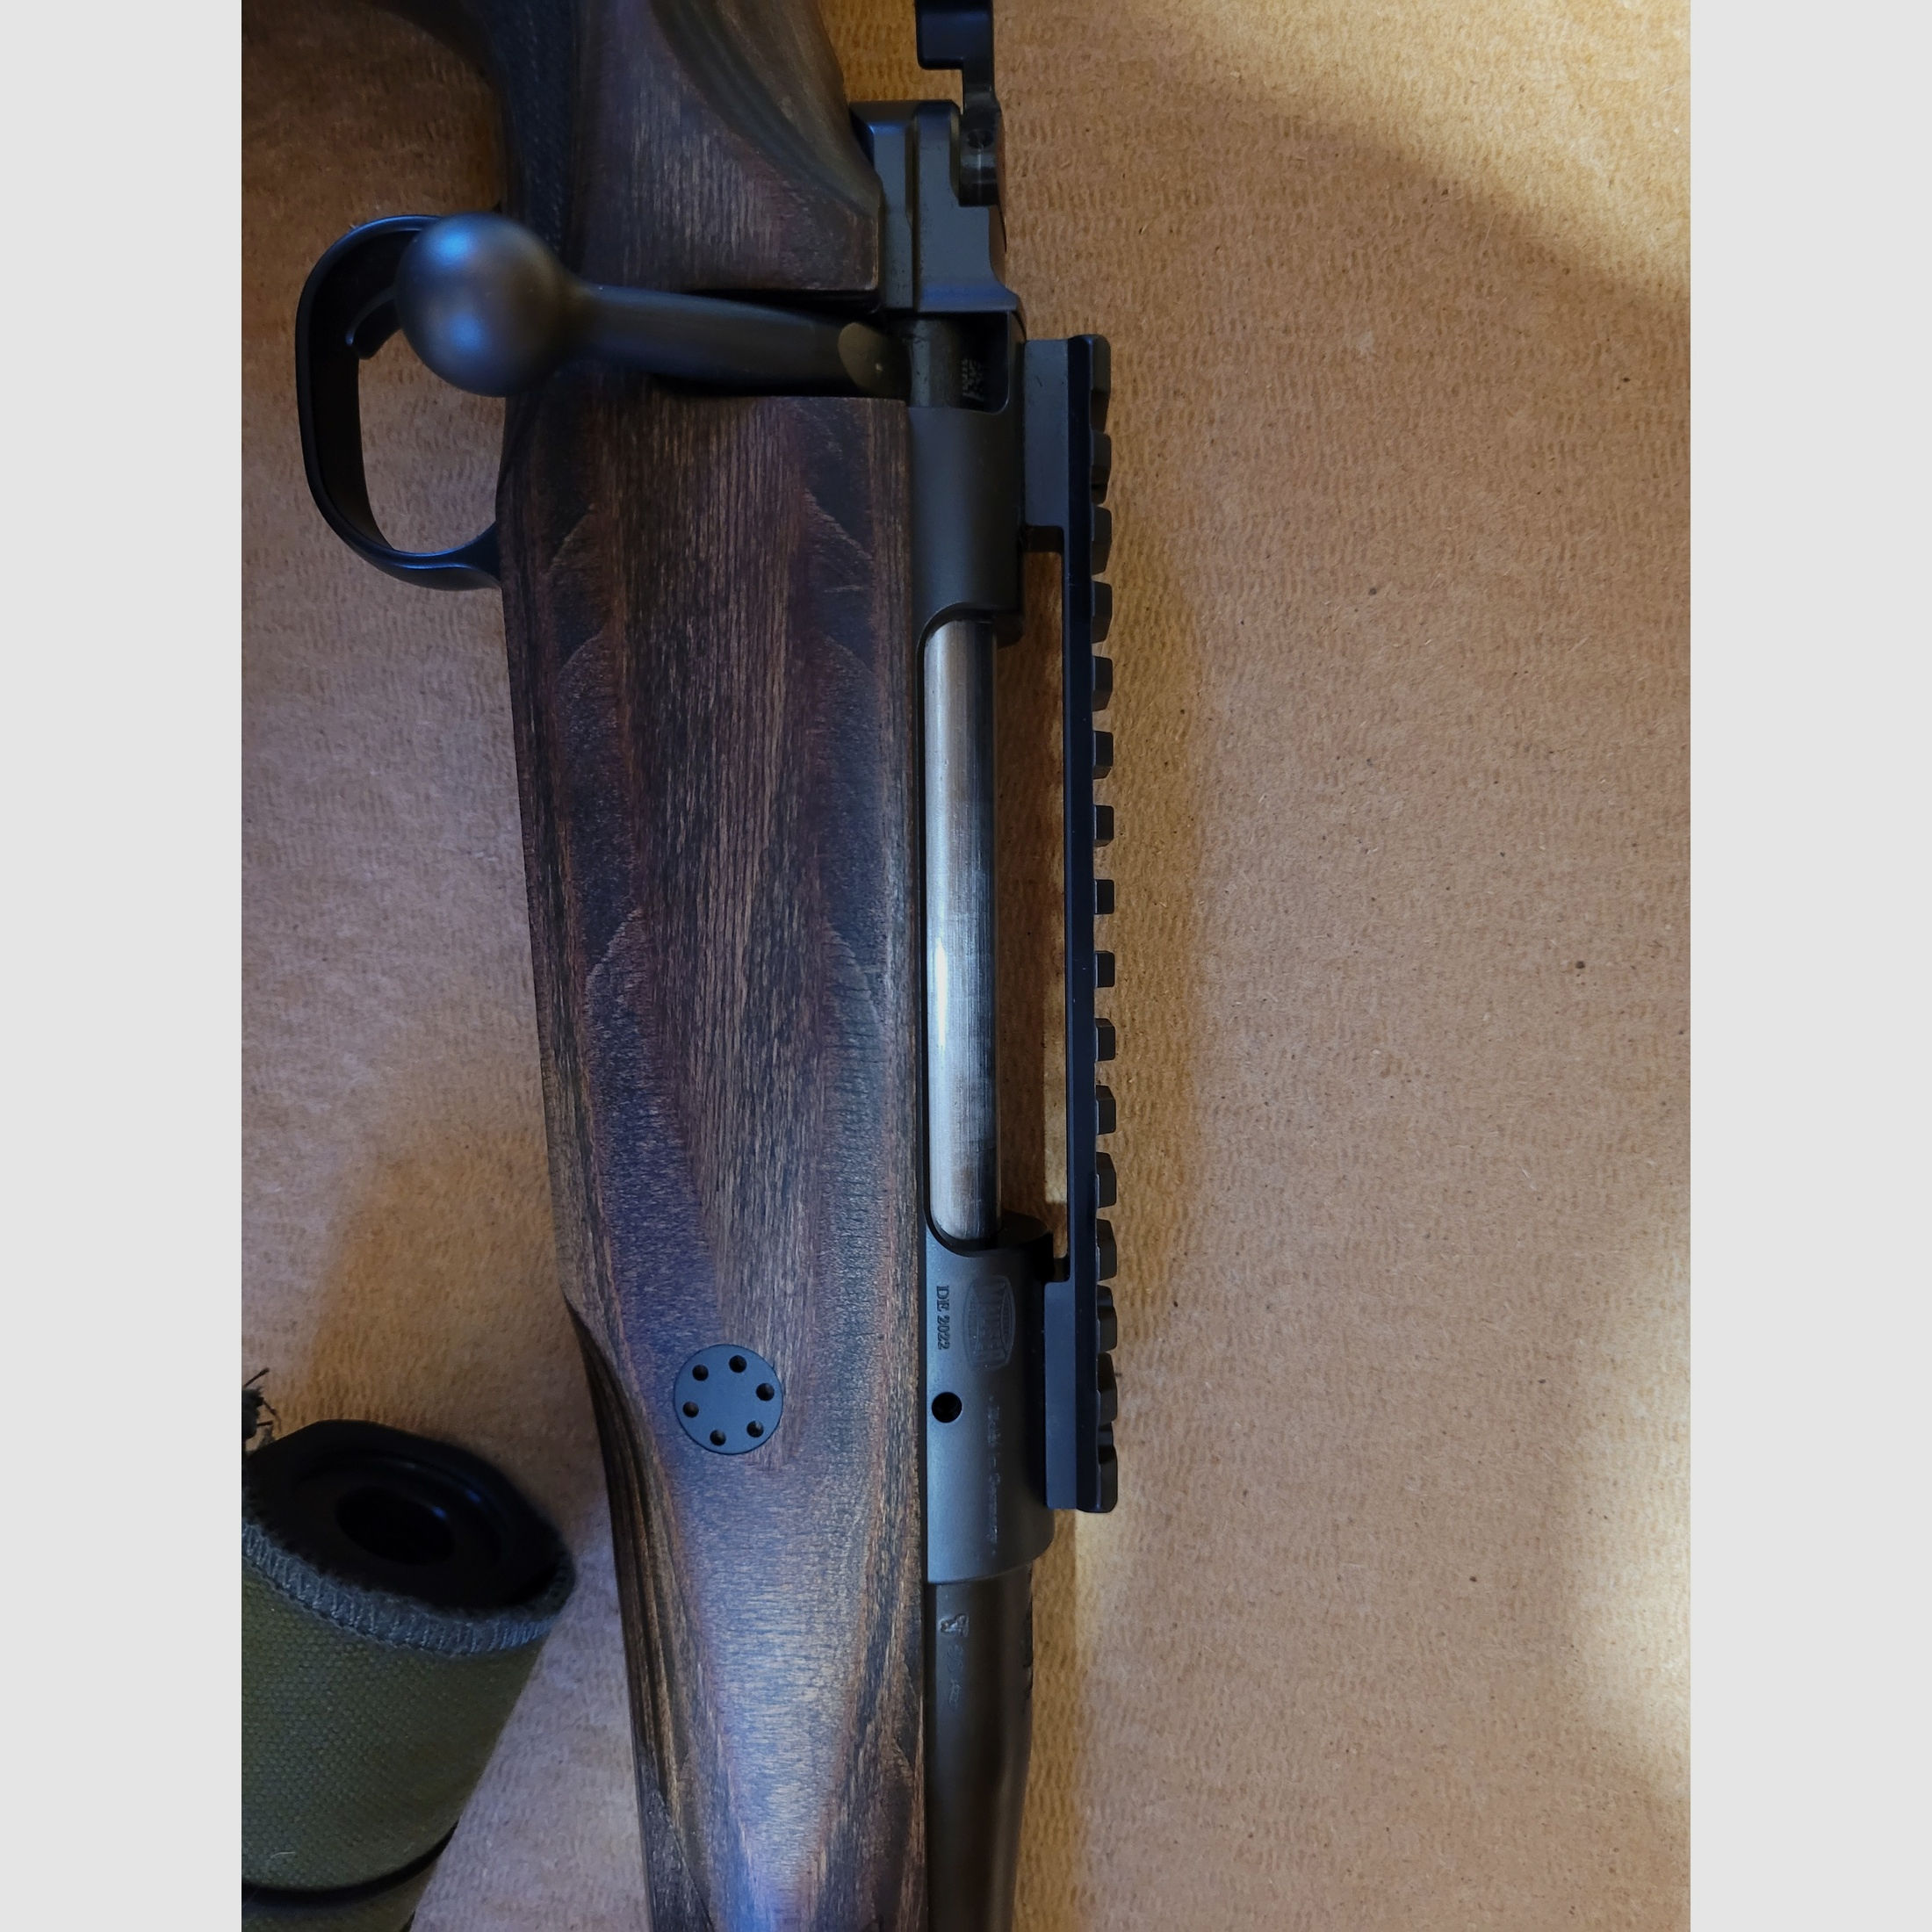 Mauser M12 Max in .308 Win inkl. Handspannung, Picatinnyschine, Mauser Silencer